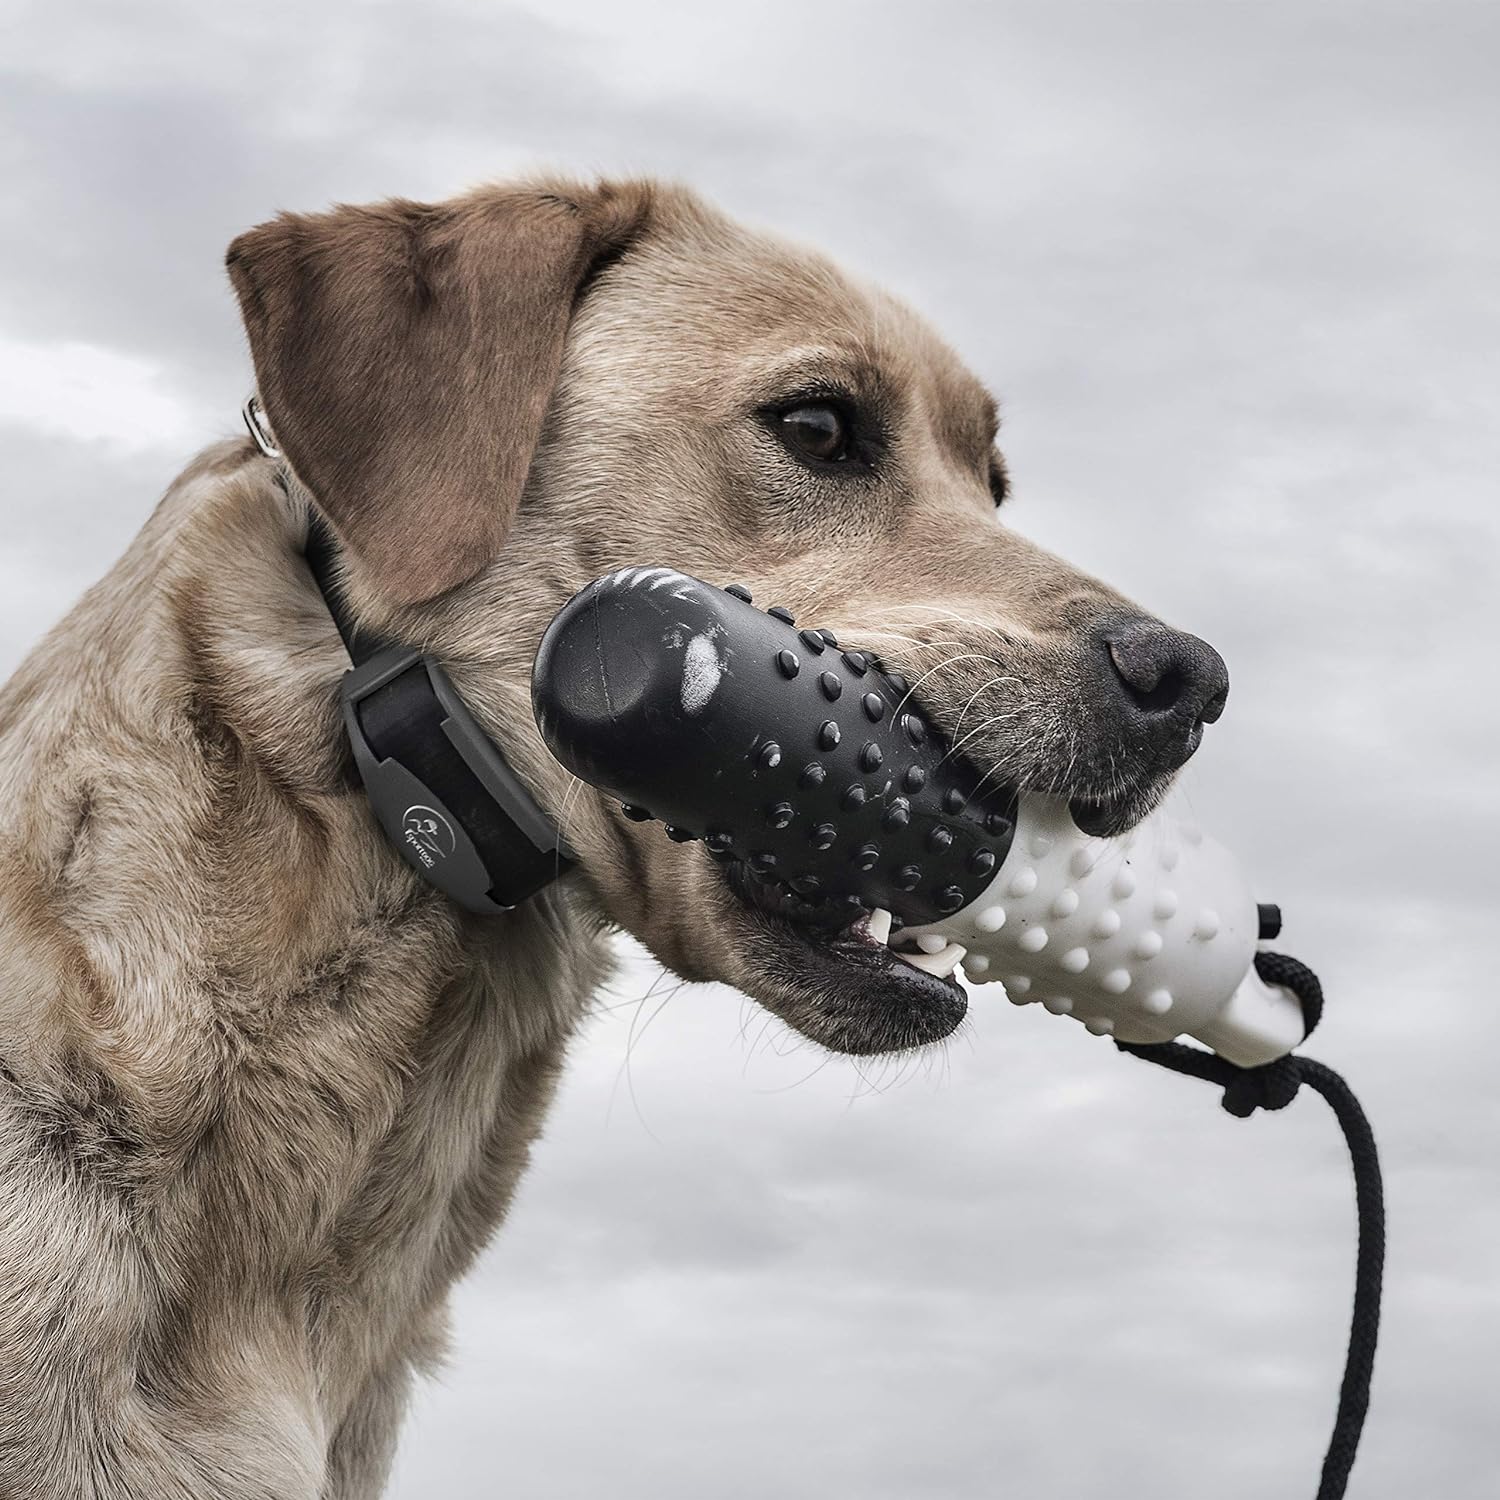 SportDOG Brand FieldTrainer 425X/SportHunter 825 Add-A-Dog Collar - Additional, or Extra Collar for Your Remote Trainer - Waterproof and Rechargeable with Tone, Vibration, and Static